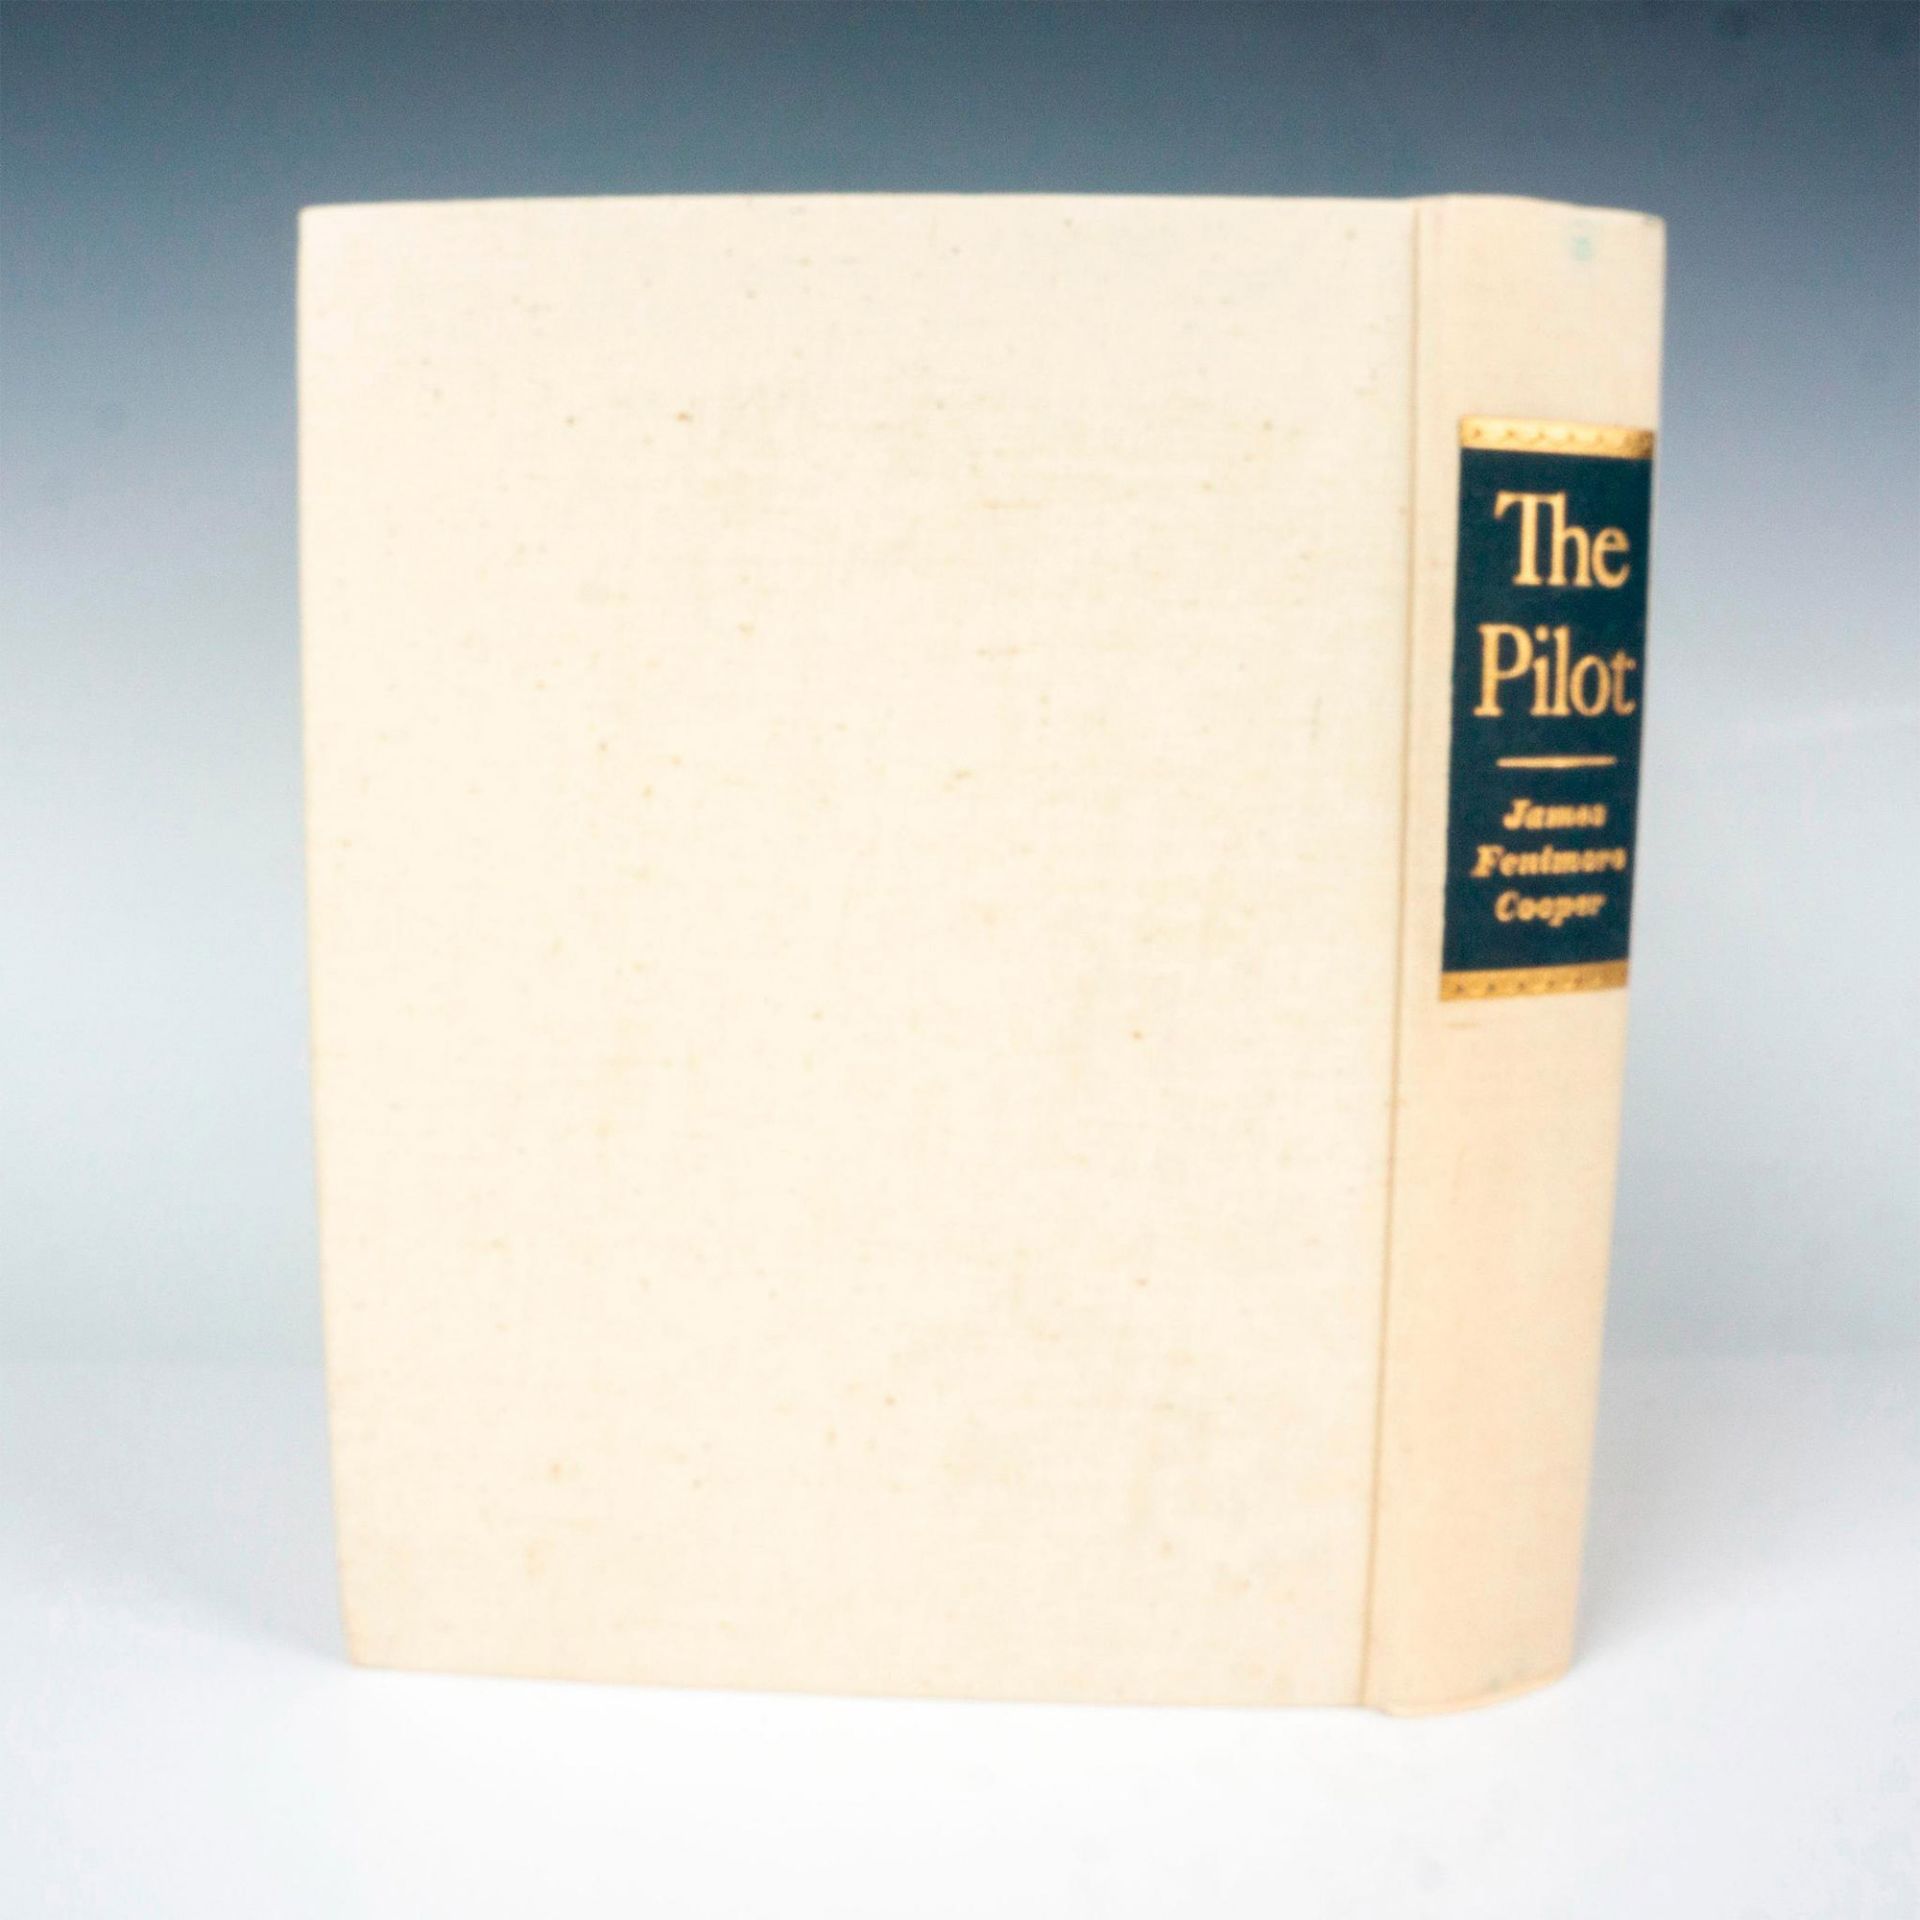 First Edition The Pilot, Book by James Fenimore Cooper - Image 2 of 3